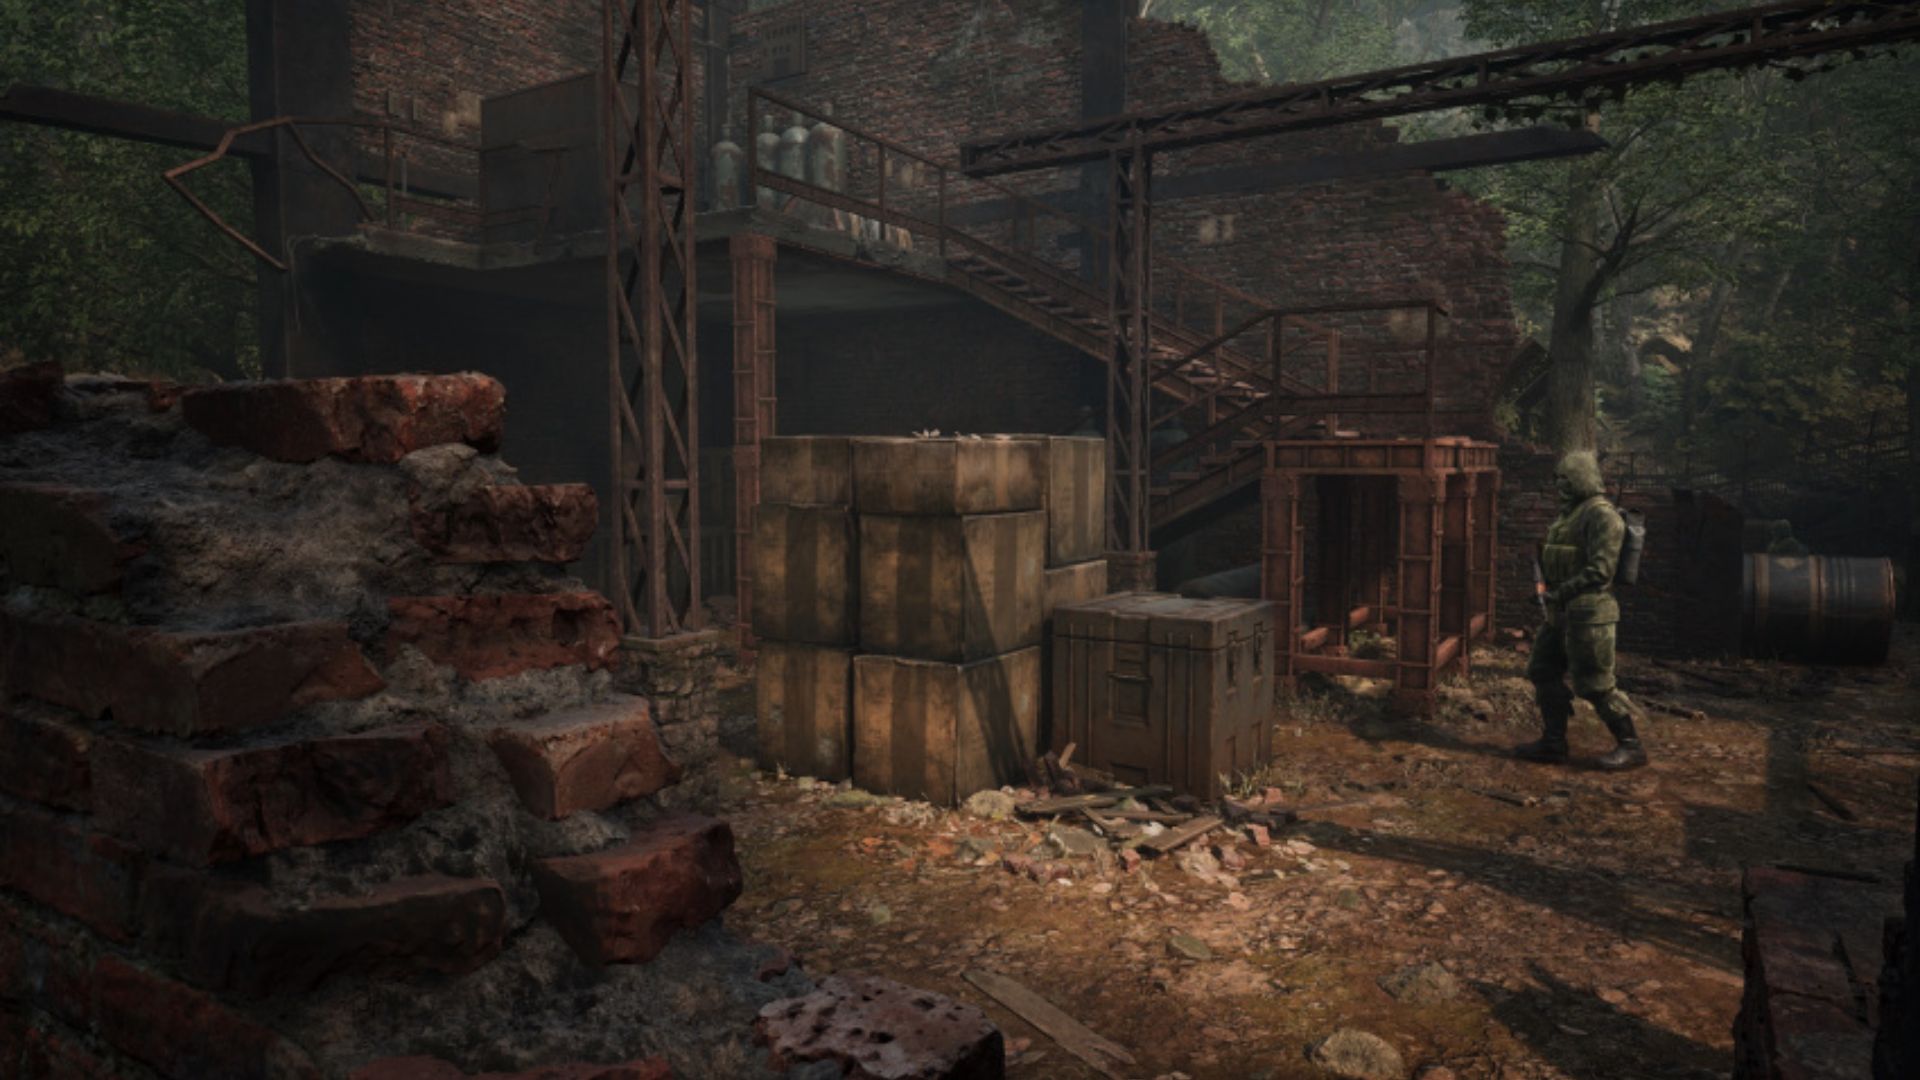 A base in the jungle in Metal Gear Solid 3 remake